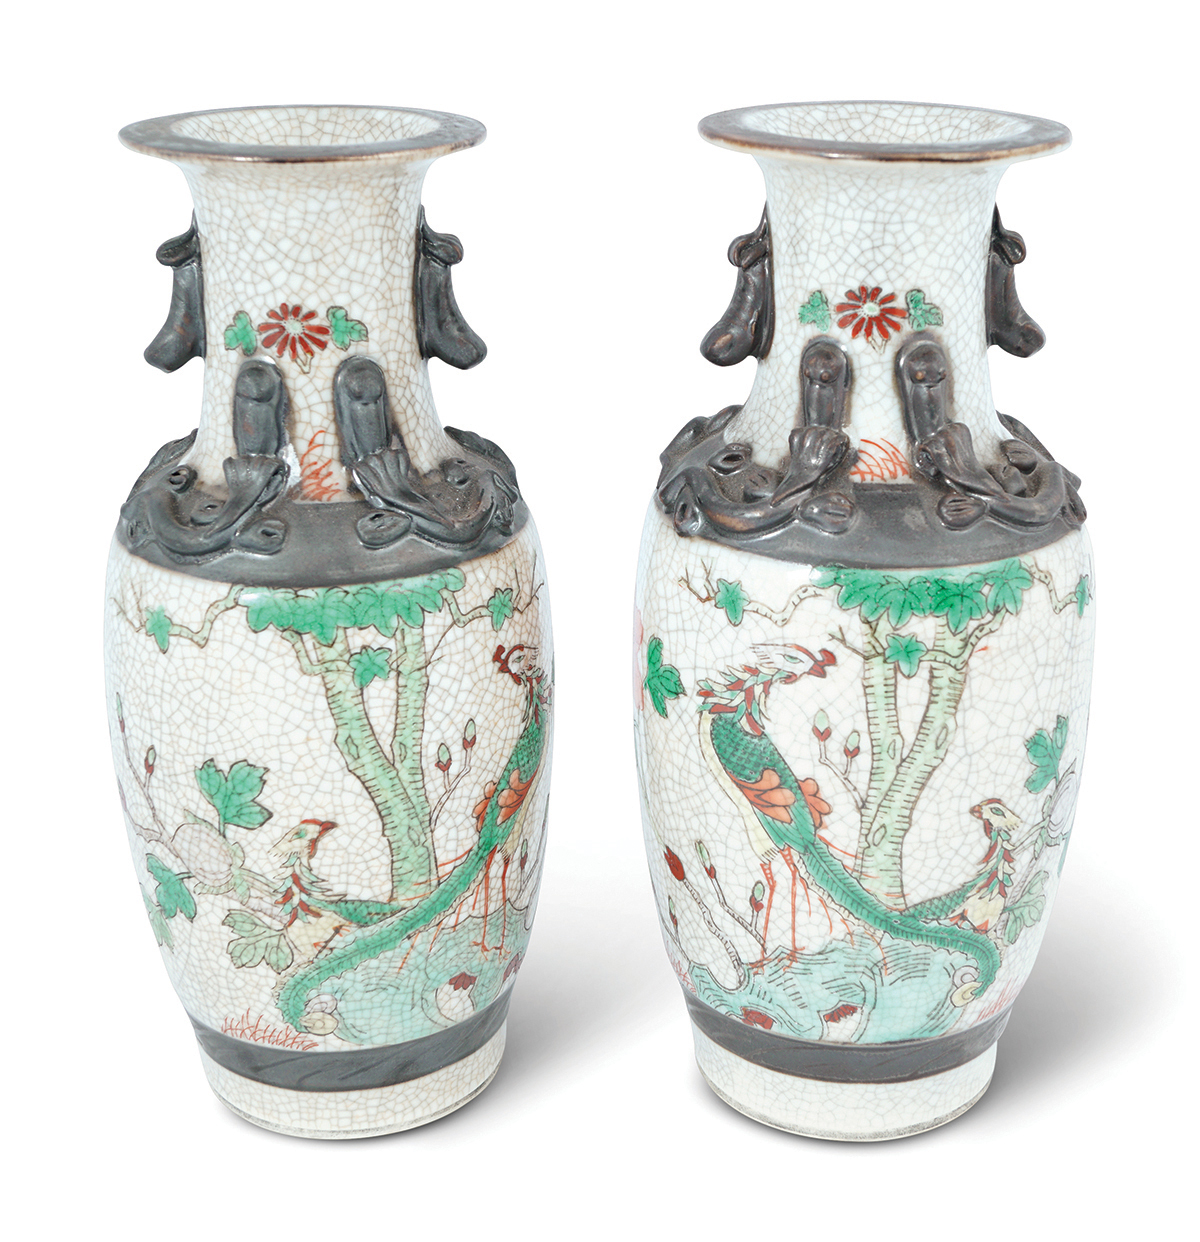 PAIR OF CHINESE DRAGON CRACKLE-GLAZED VASES